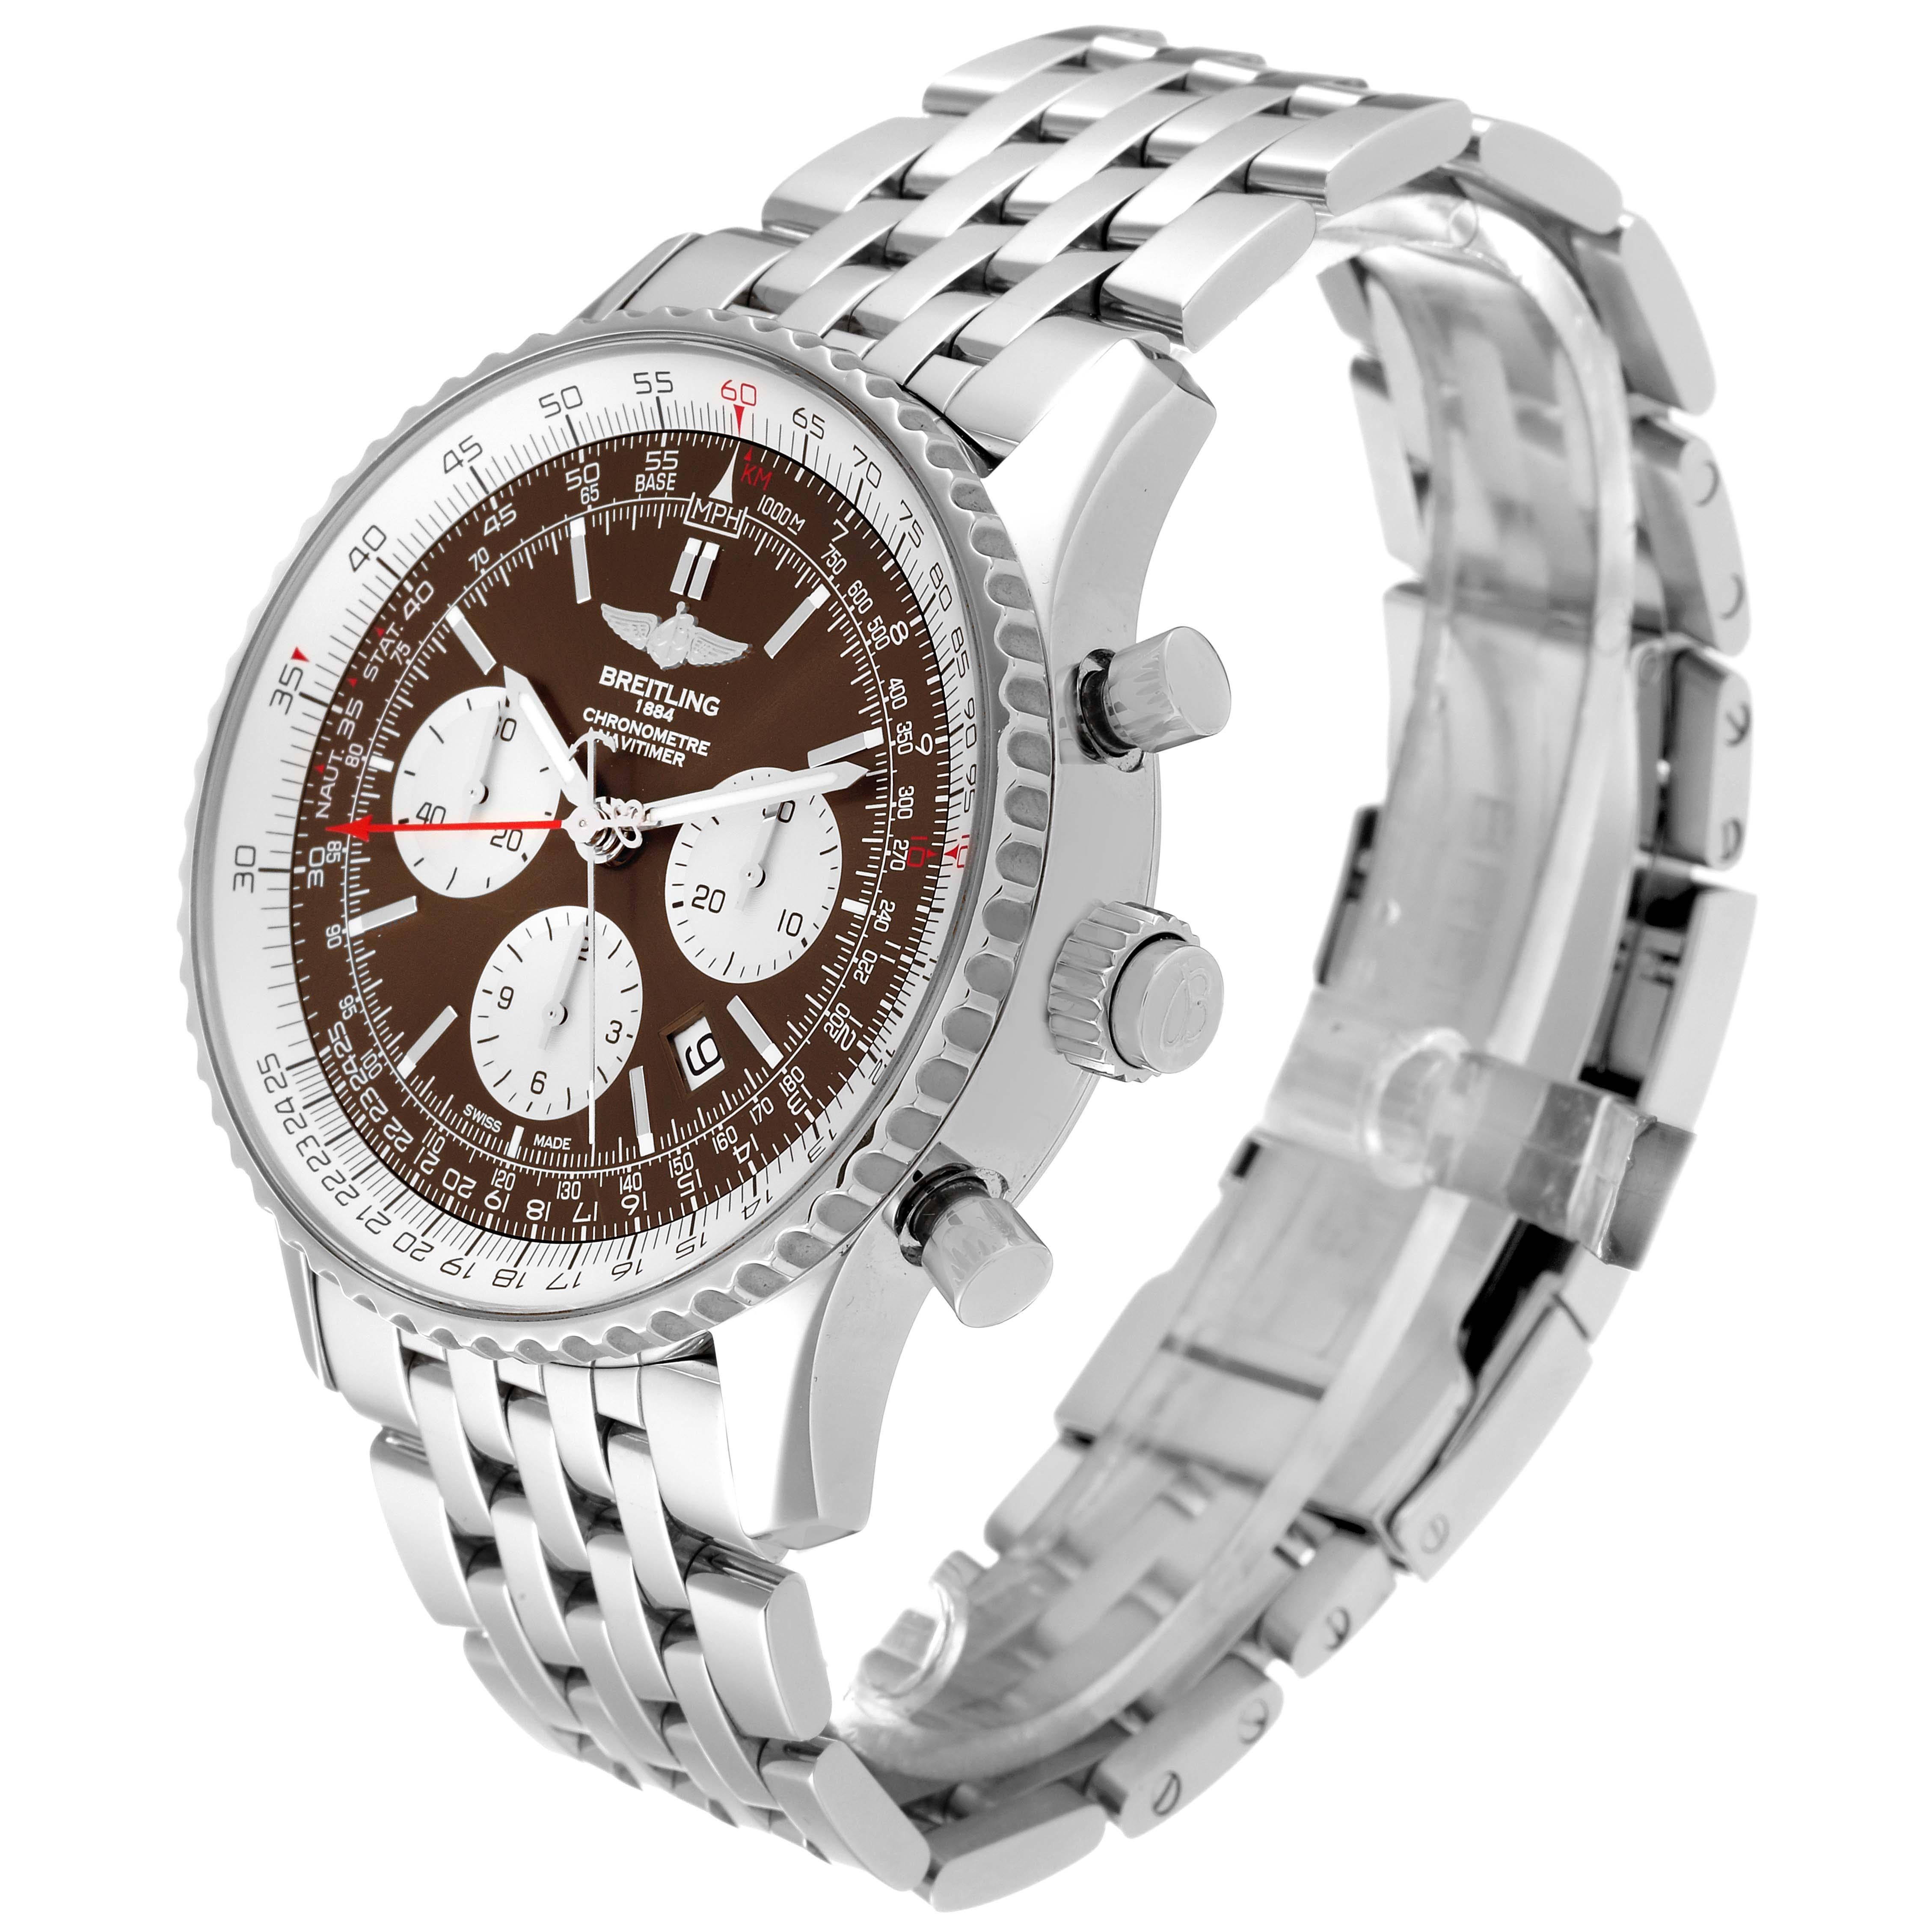 Breitling Navitimer Rattrapante Chronograph Steel Mens Watch AB0310 For Sale 3